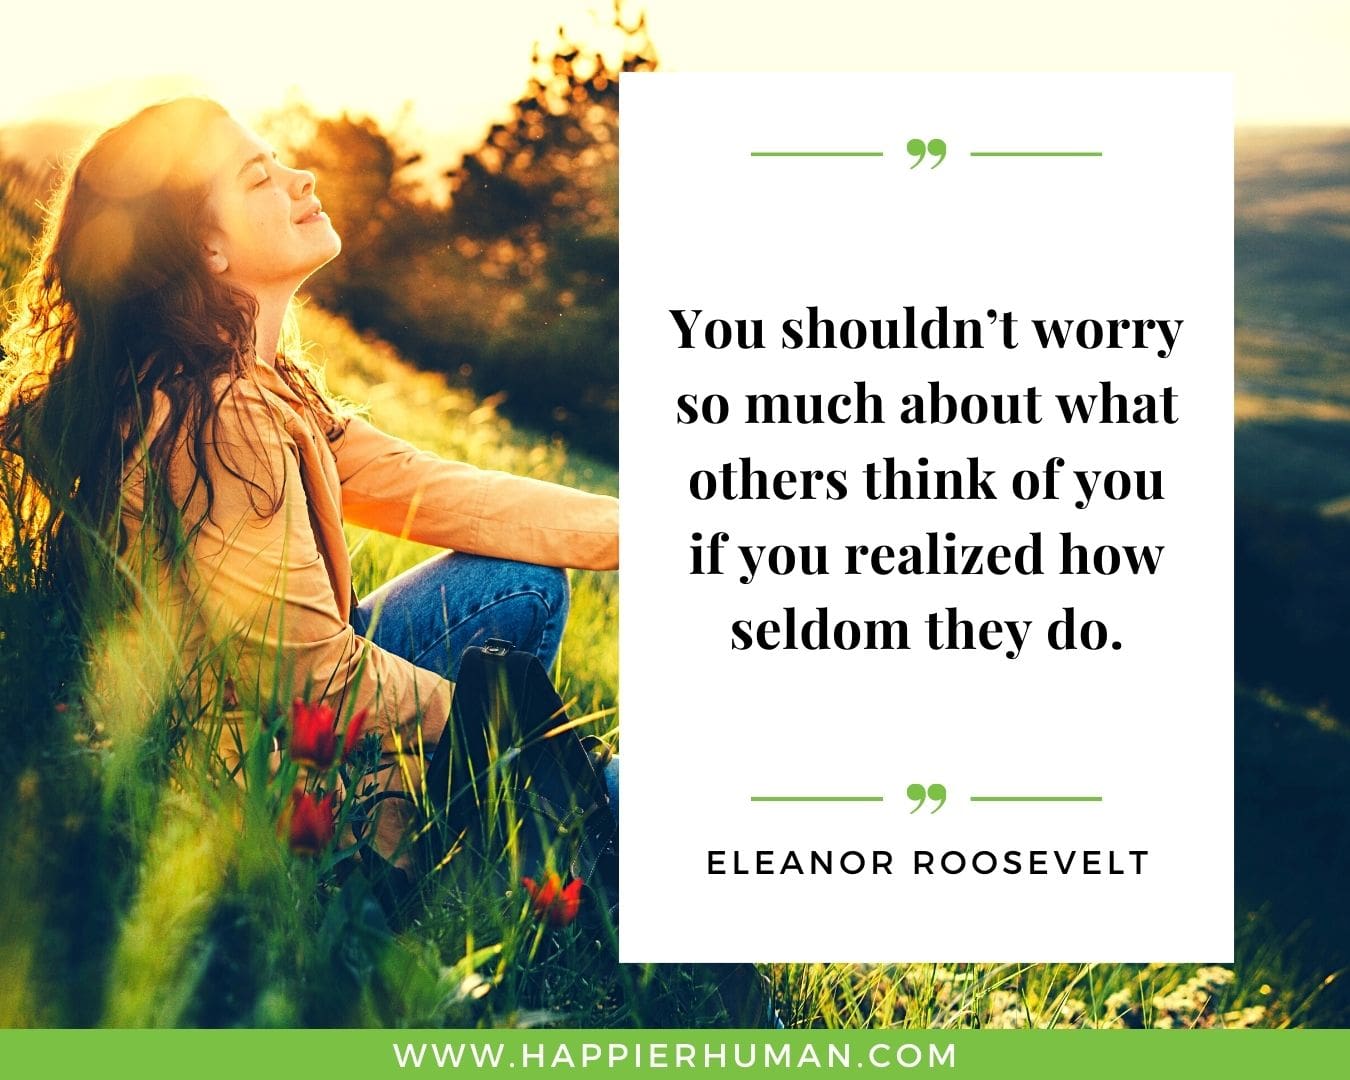 Introvert Quotes - “You shouldn’t worry so much about what others think of you if you realized how seldom they do.” – Eleanor Roosevelt